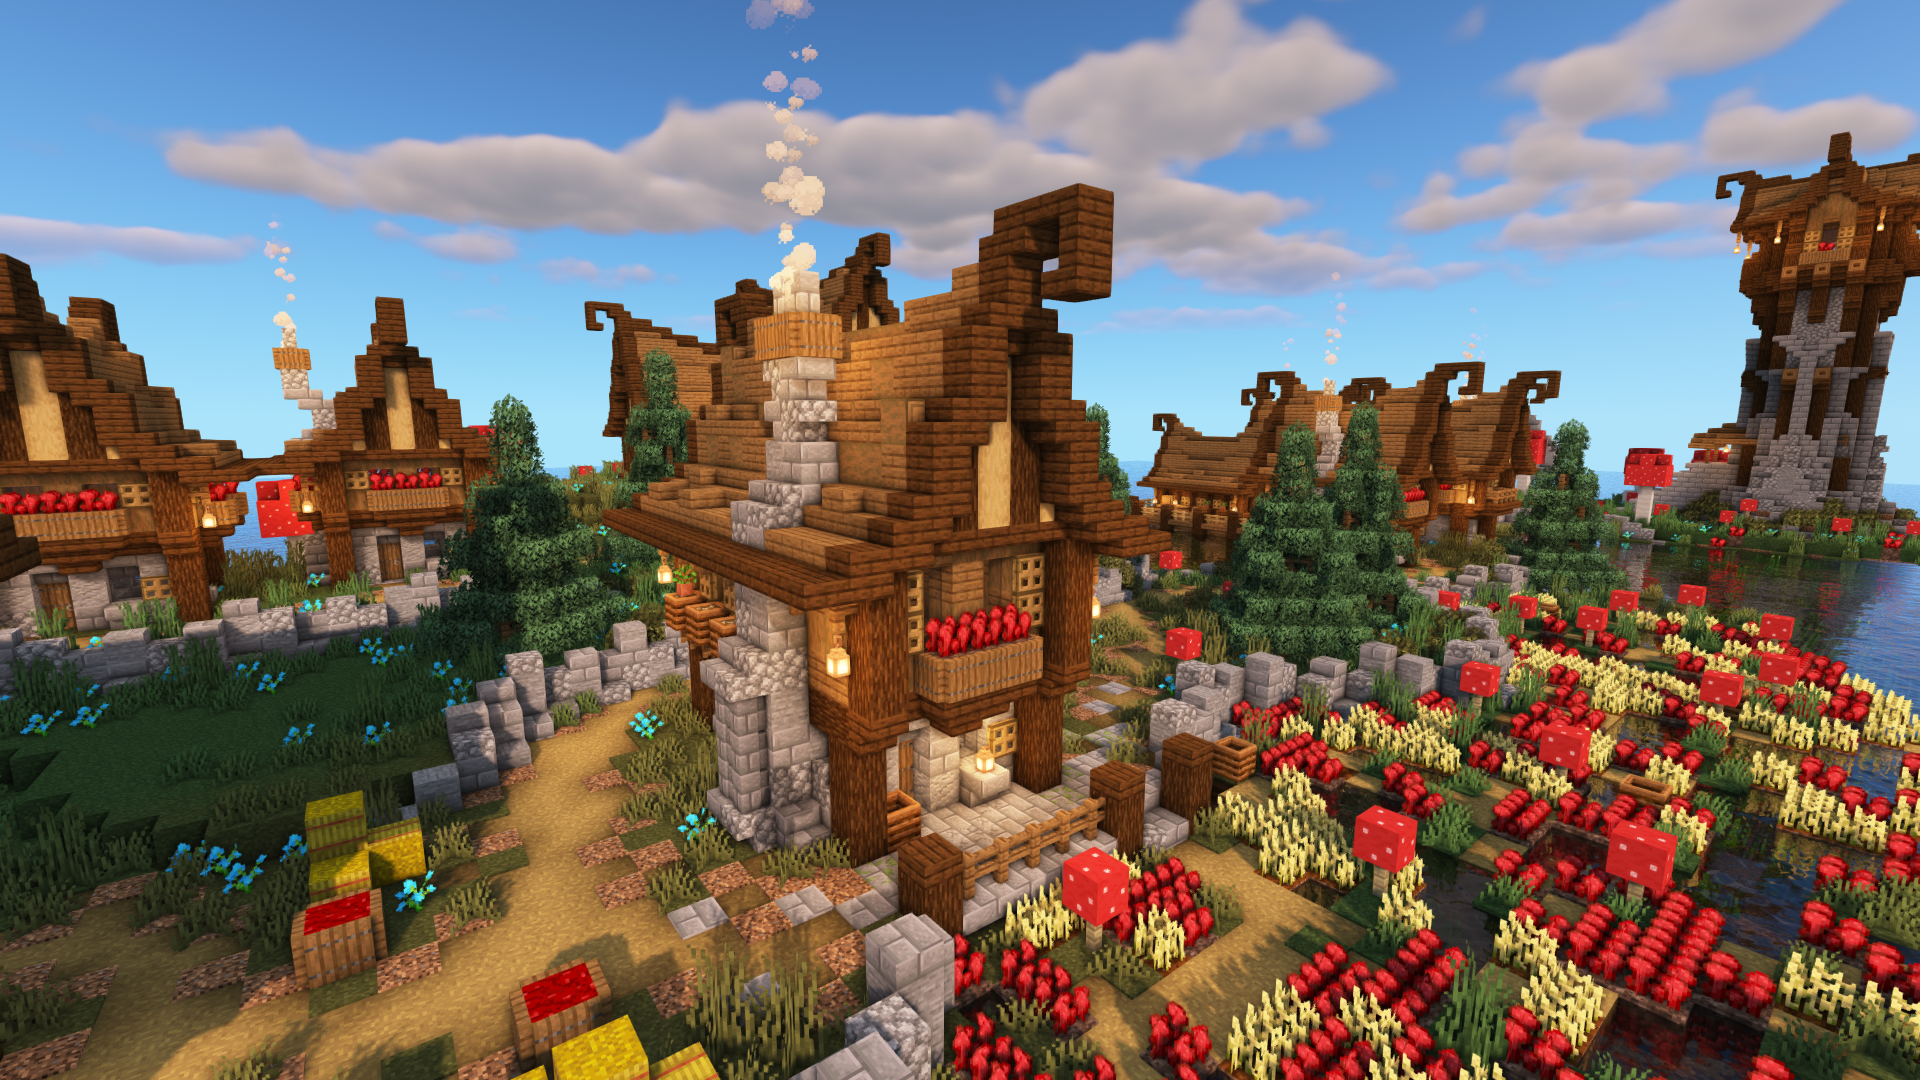 Minecraft Timelapse: Transforming a Swamp Biome into a Fantasy Village